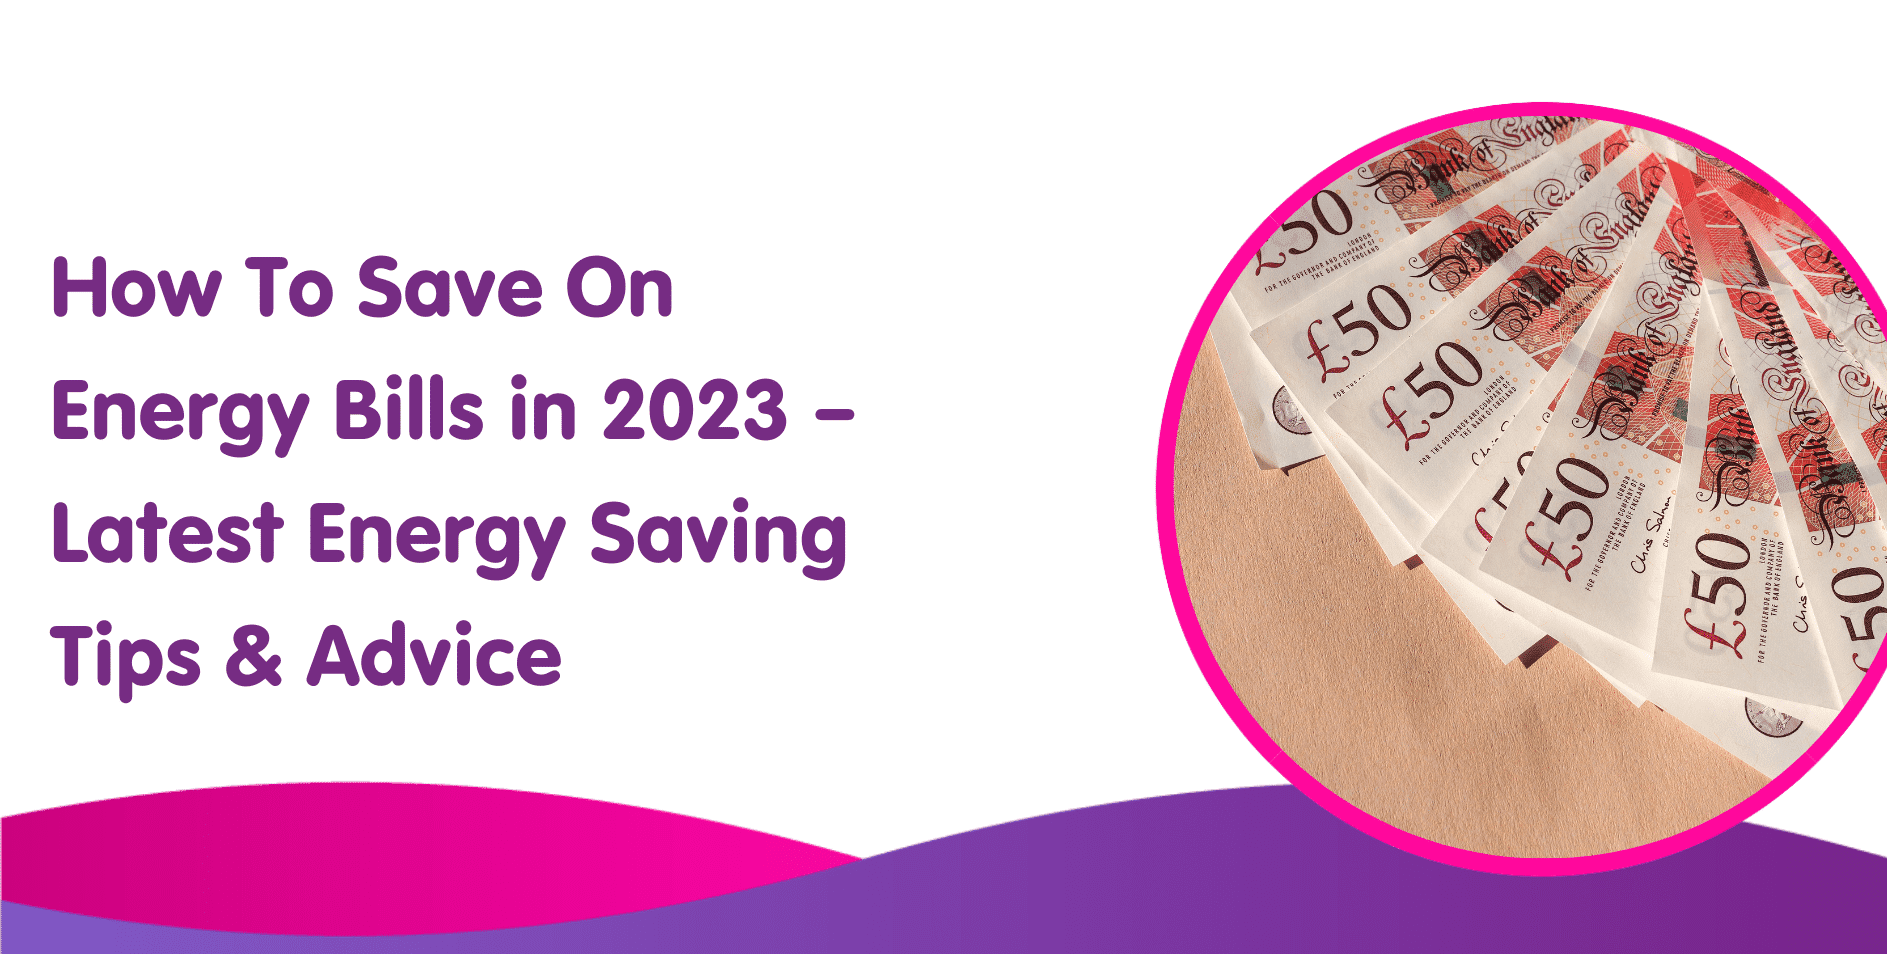 https://www.boilercentral.com/wp-content/uploads/How-To-Save-On-Energy-Bills-in-2023-%E2%80%93-Latest-Energy-Saving-Tips-Advice.png